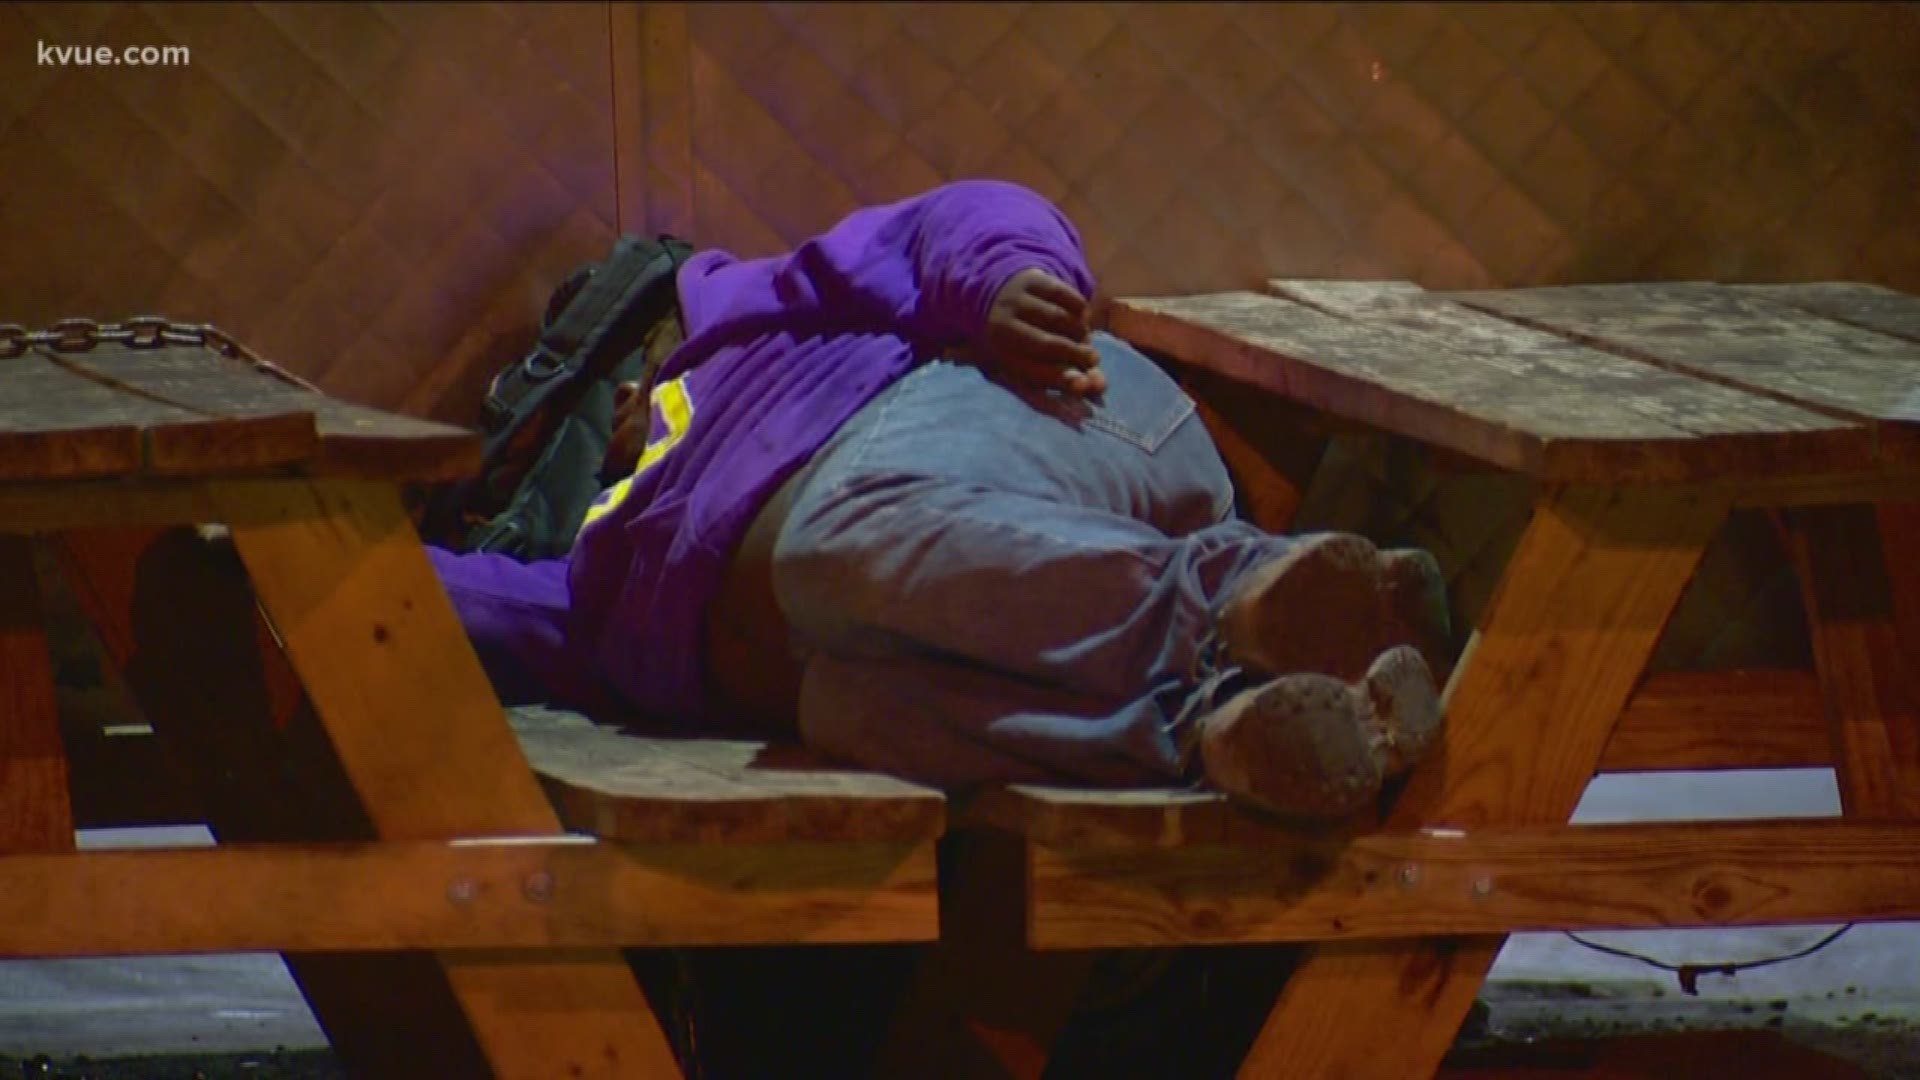 There's a new way to report a safety issue or concern related to the homeless.